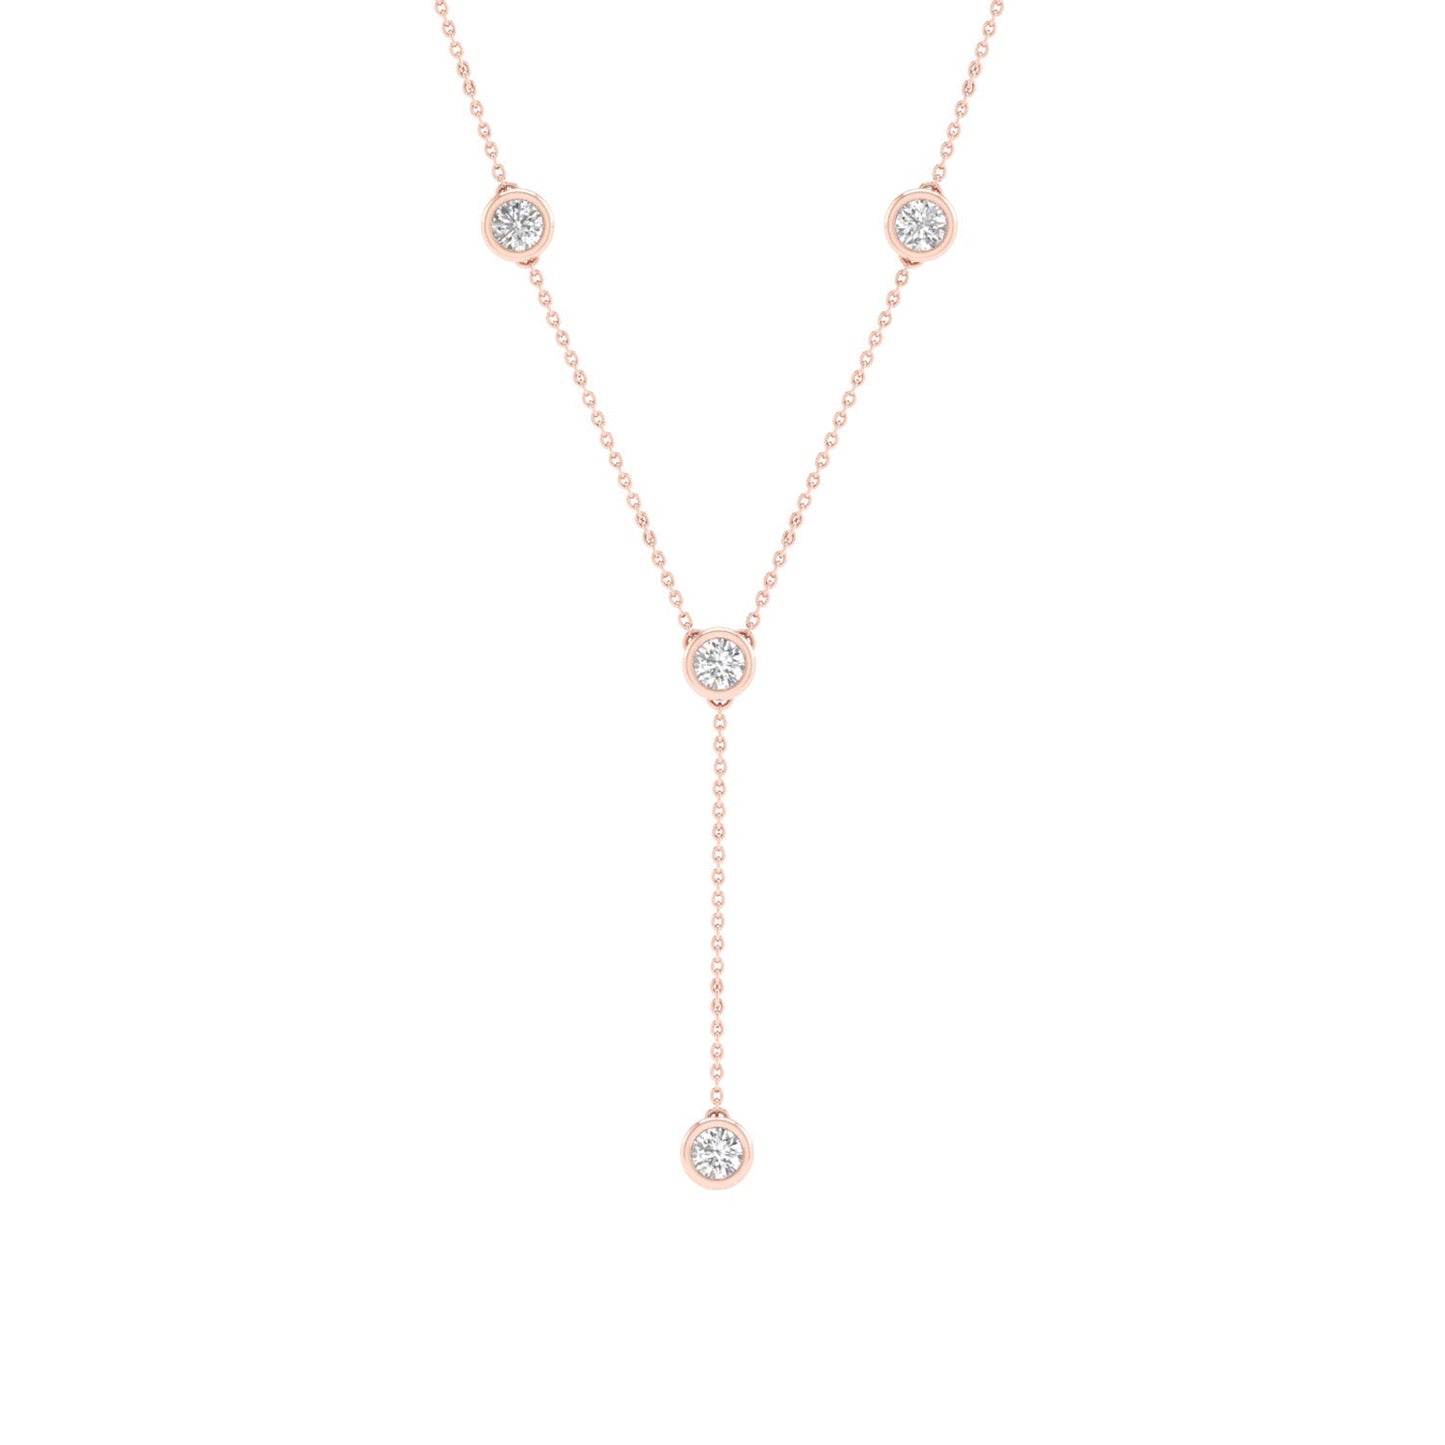 Encompassing Round Stationed Y Necklace_Product angle_PCP Main Image